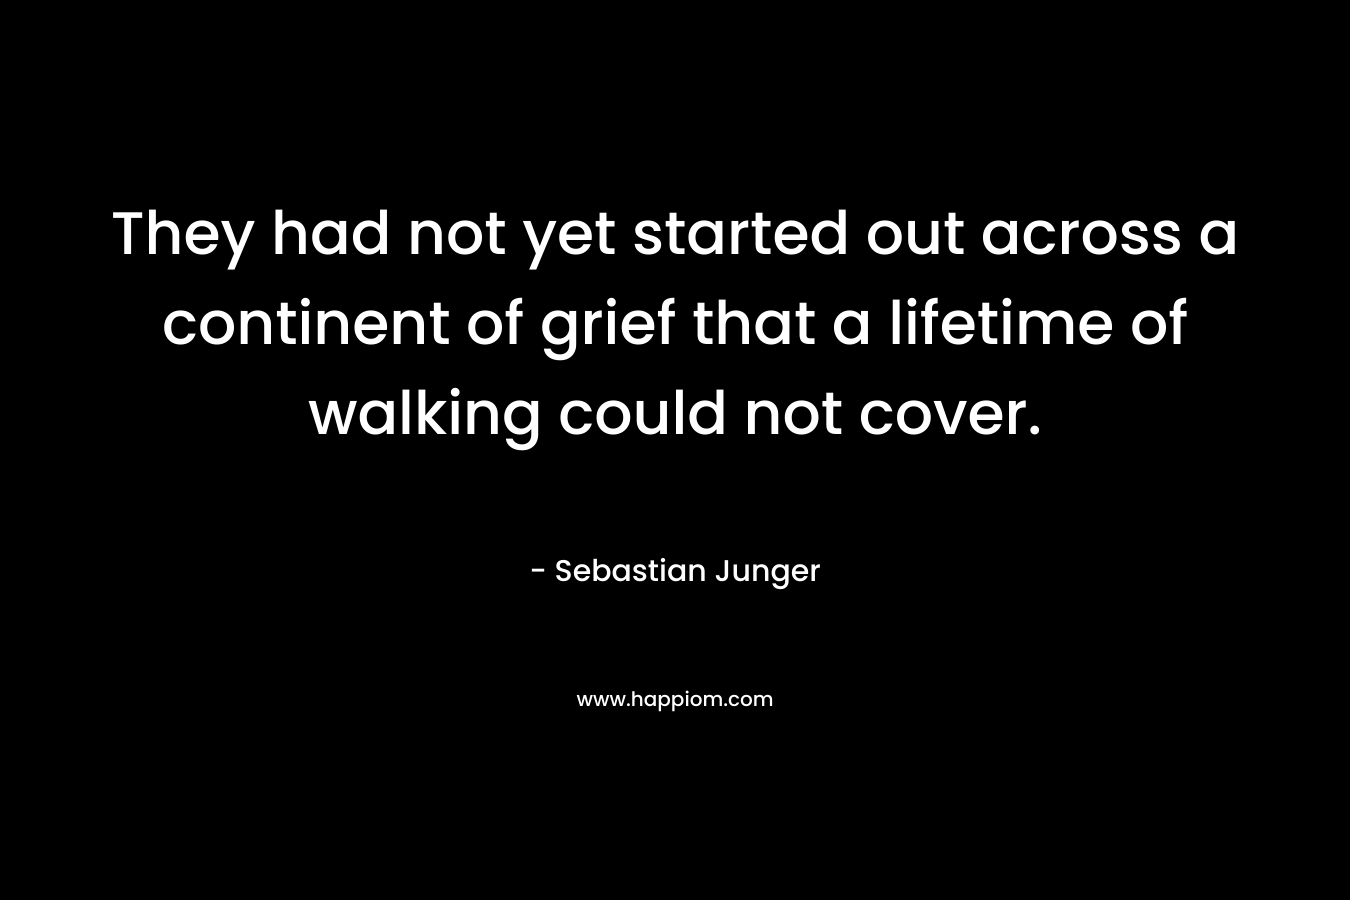 They had not yet started out across a continent of grief that a lifetime of walking could not cover. – Sebastian Junger